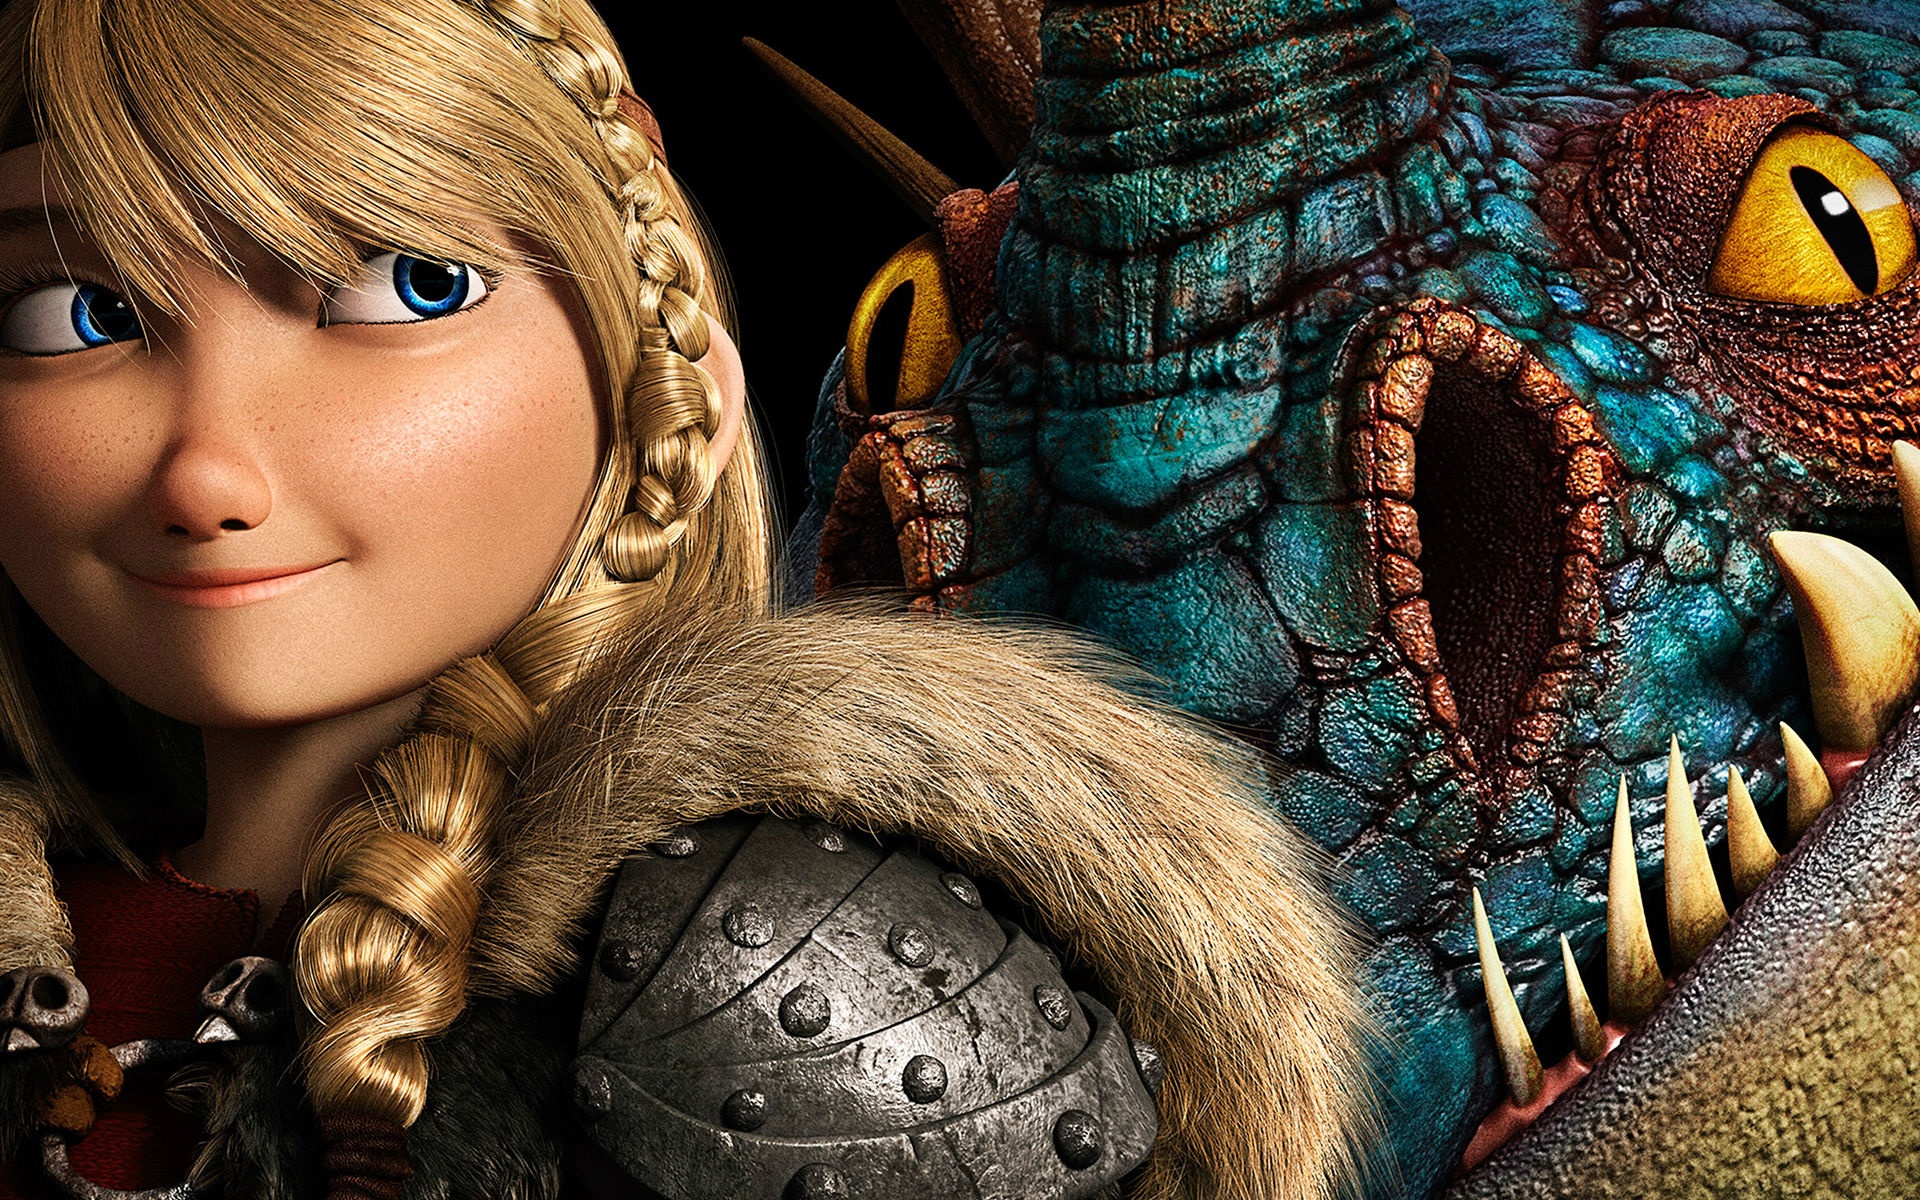 How to Train Your Dragon 2, Full Movie